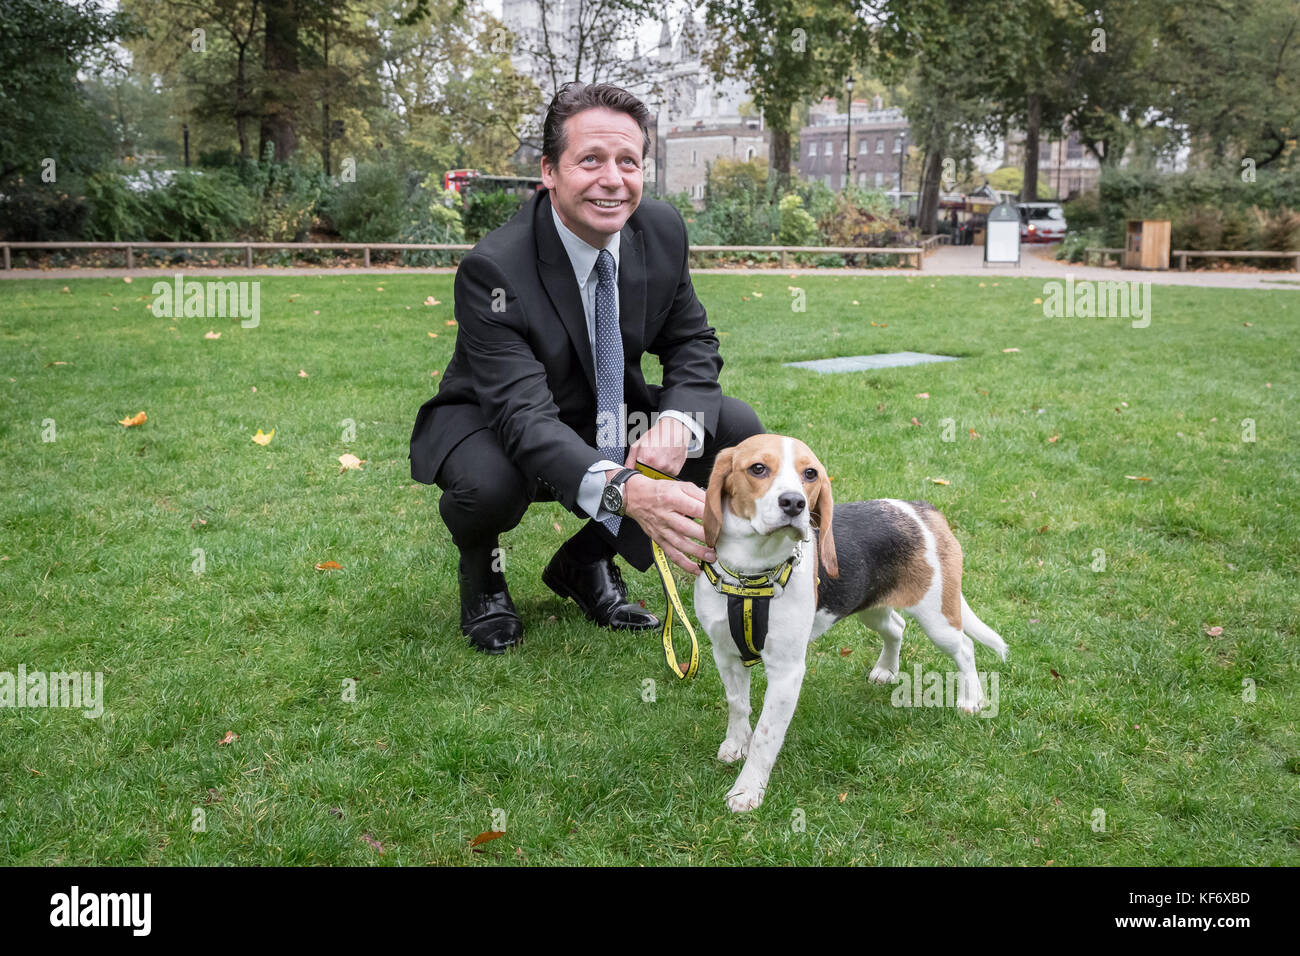 London, UK. 26th Oct, 2017. Nigel Huddleston Conservative MP for Mid Worcestershire constituency pictured with a Dogs Trust dog ‘Bonnie’ at the 25th Annual Westminster Dog of the Year. Credit: Guy Corbishley/Alamy Live News Stock Photo